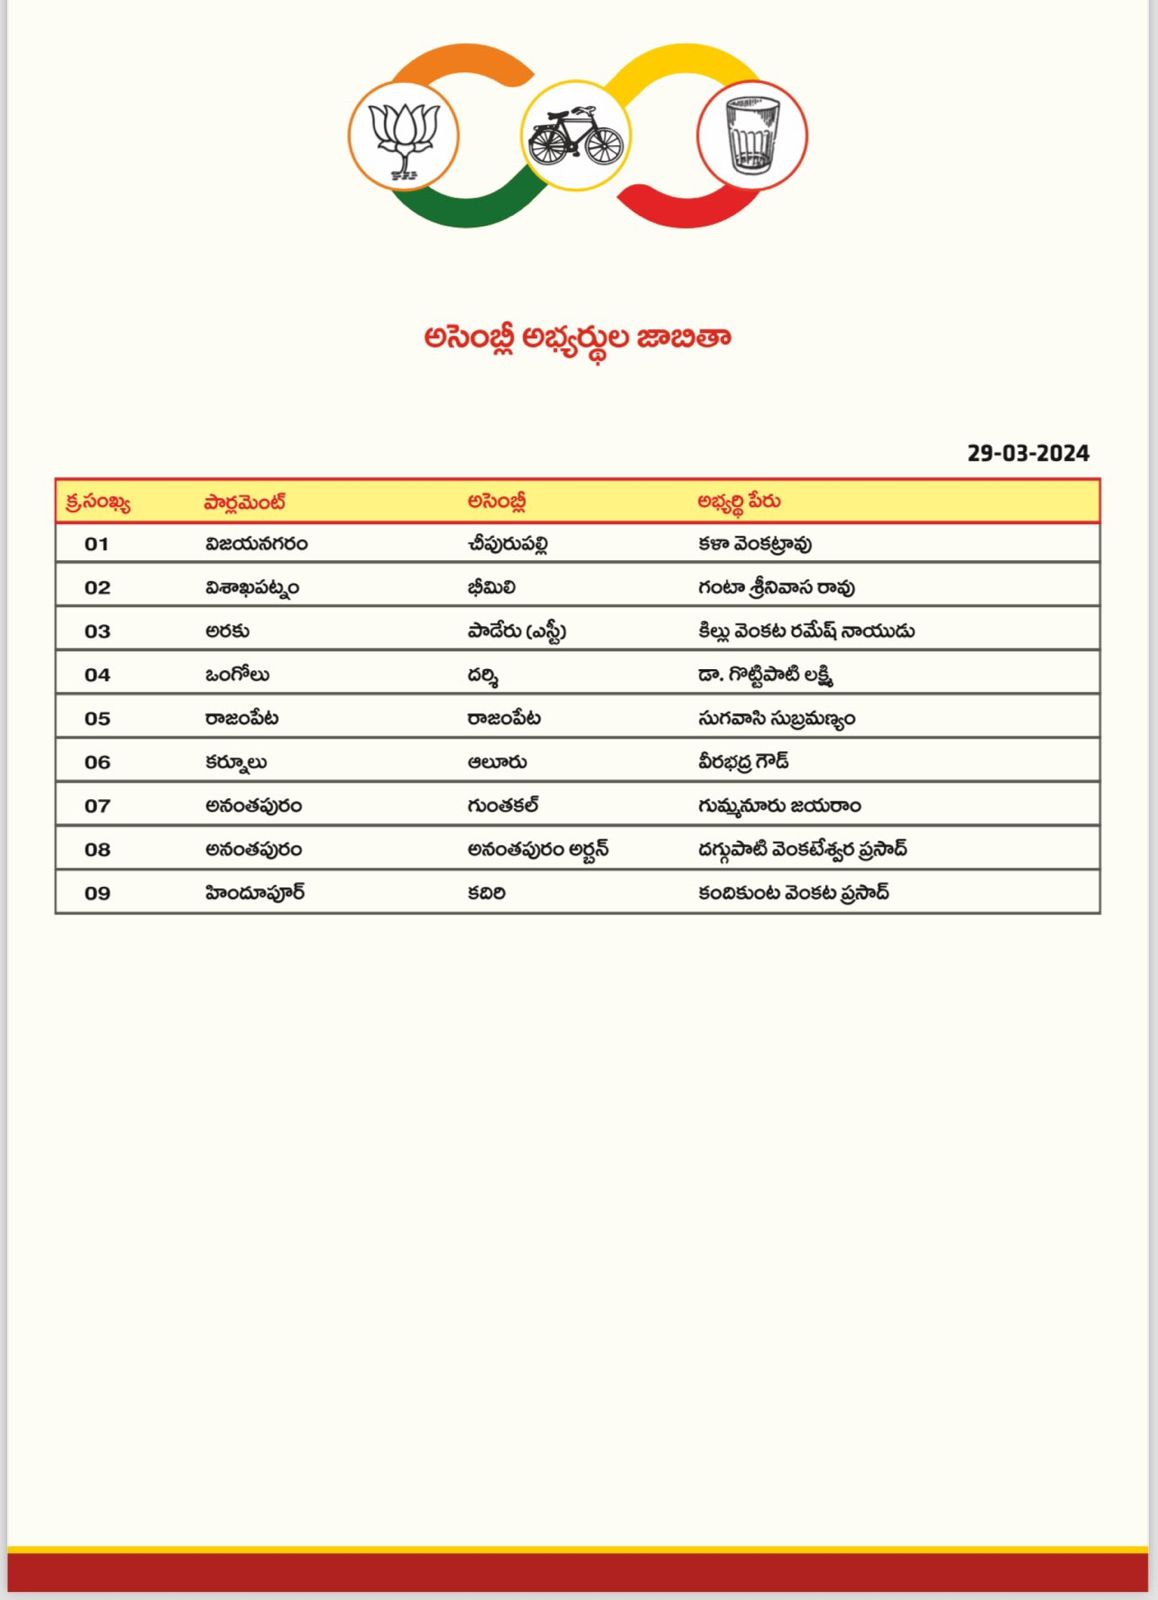 Tdp Final List Of Mla And Mp Candidates